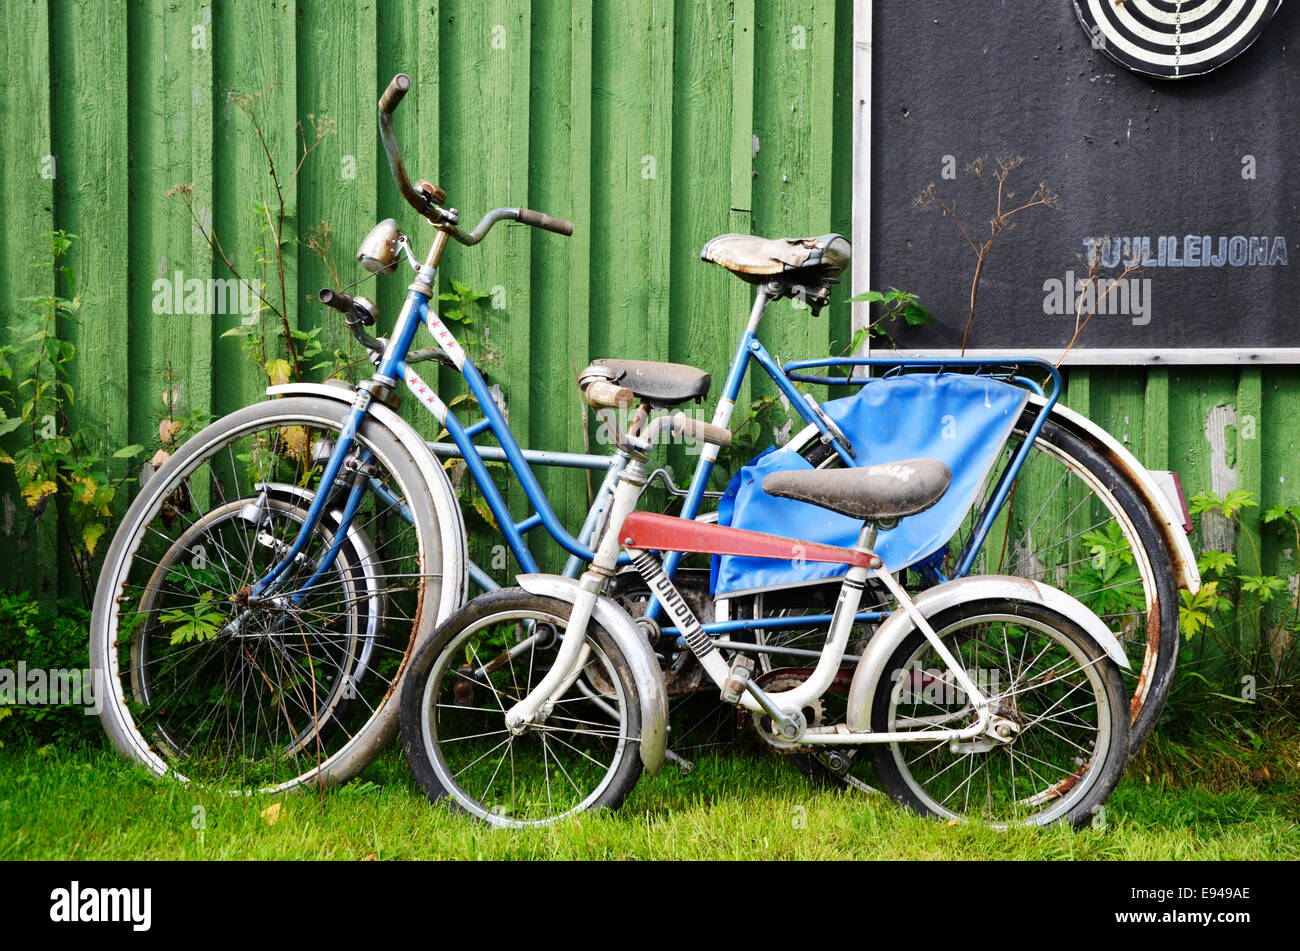 Old bicycles leaning against a barn Stock Photo